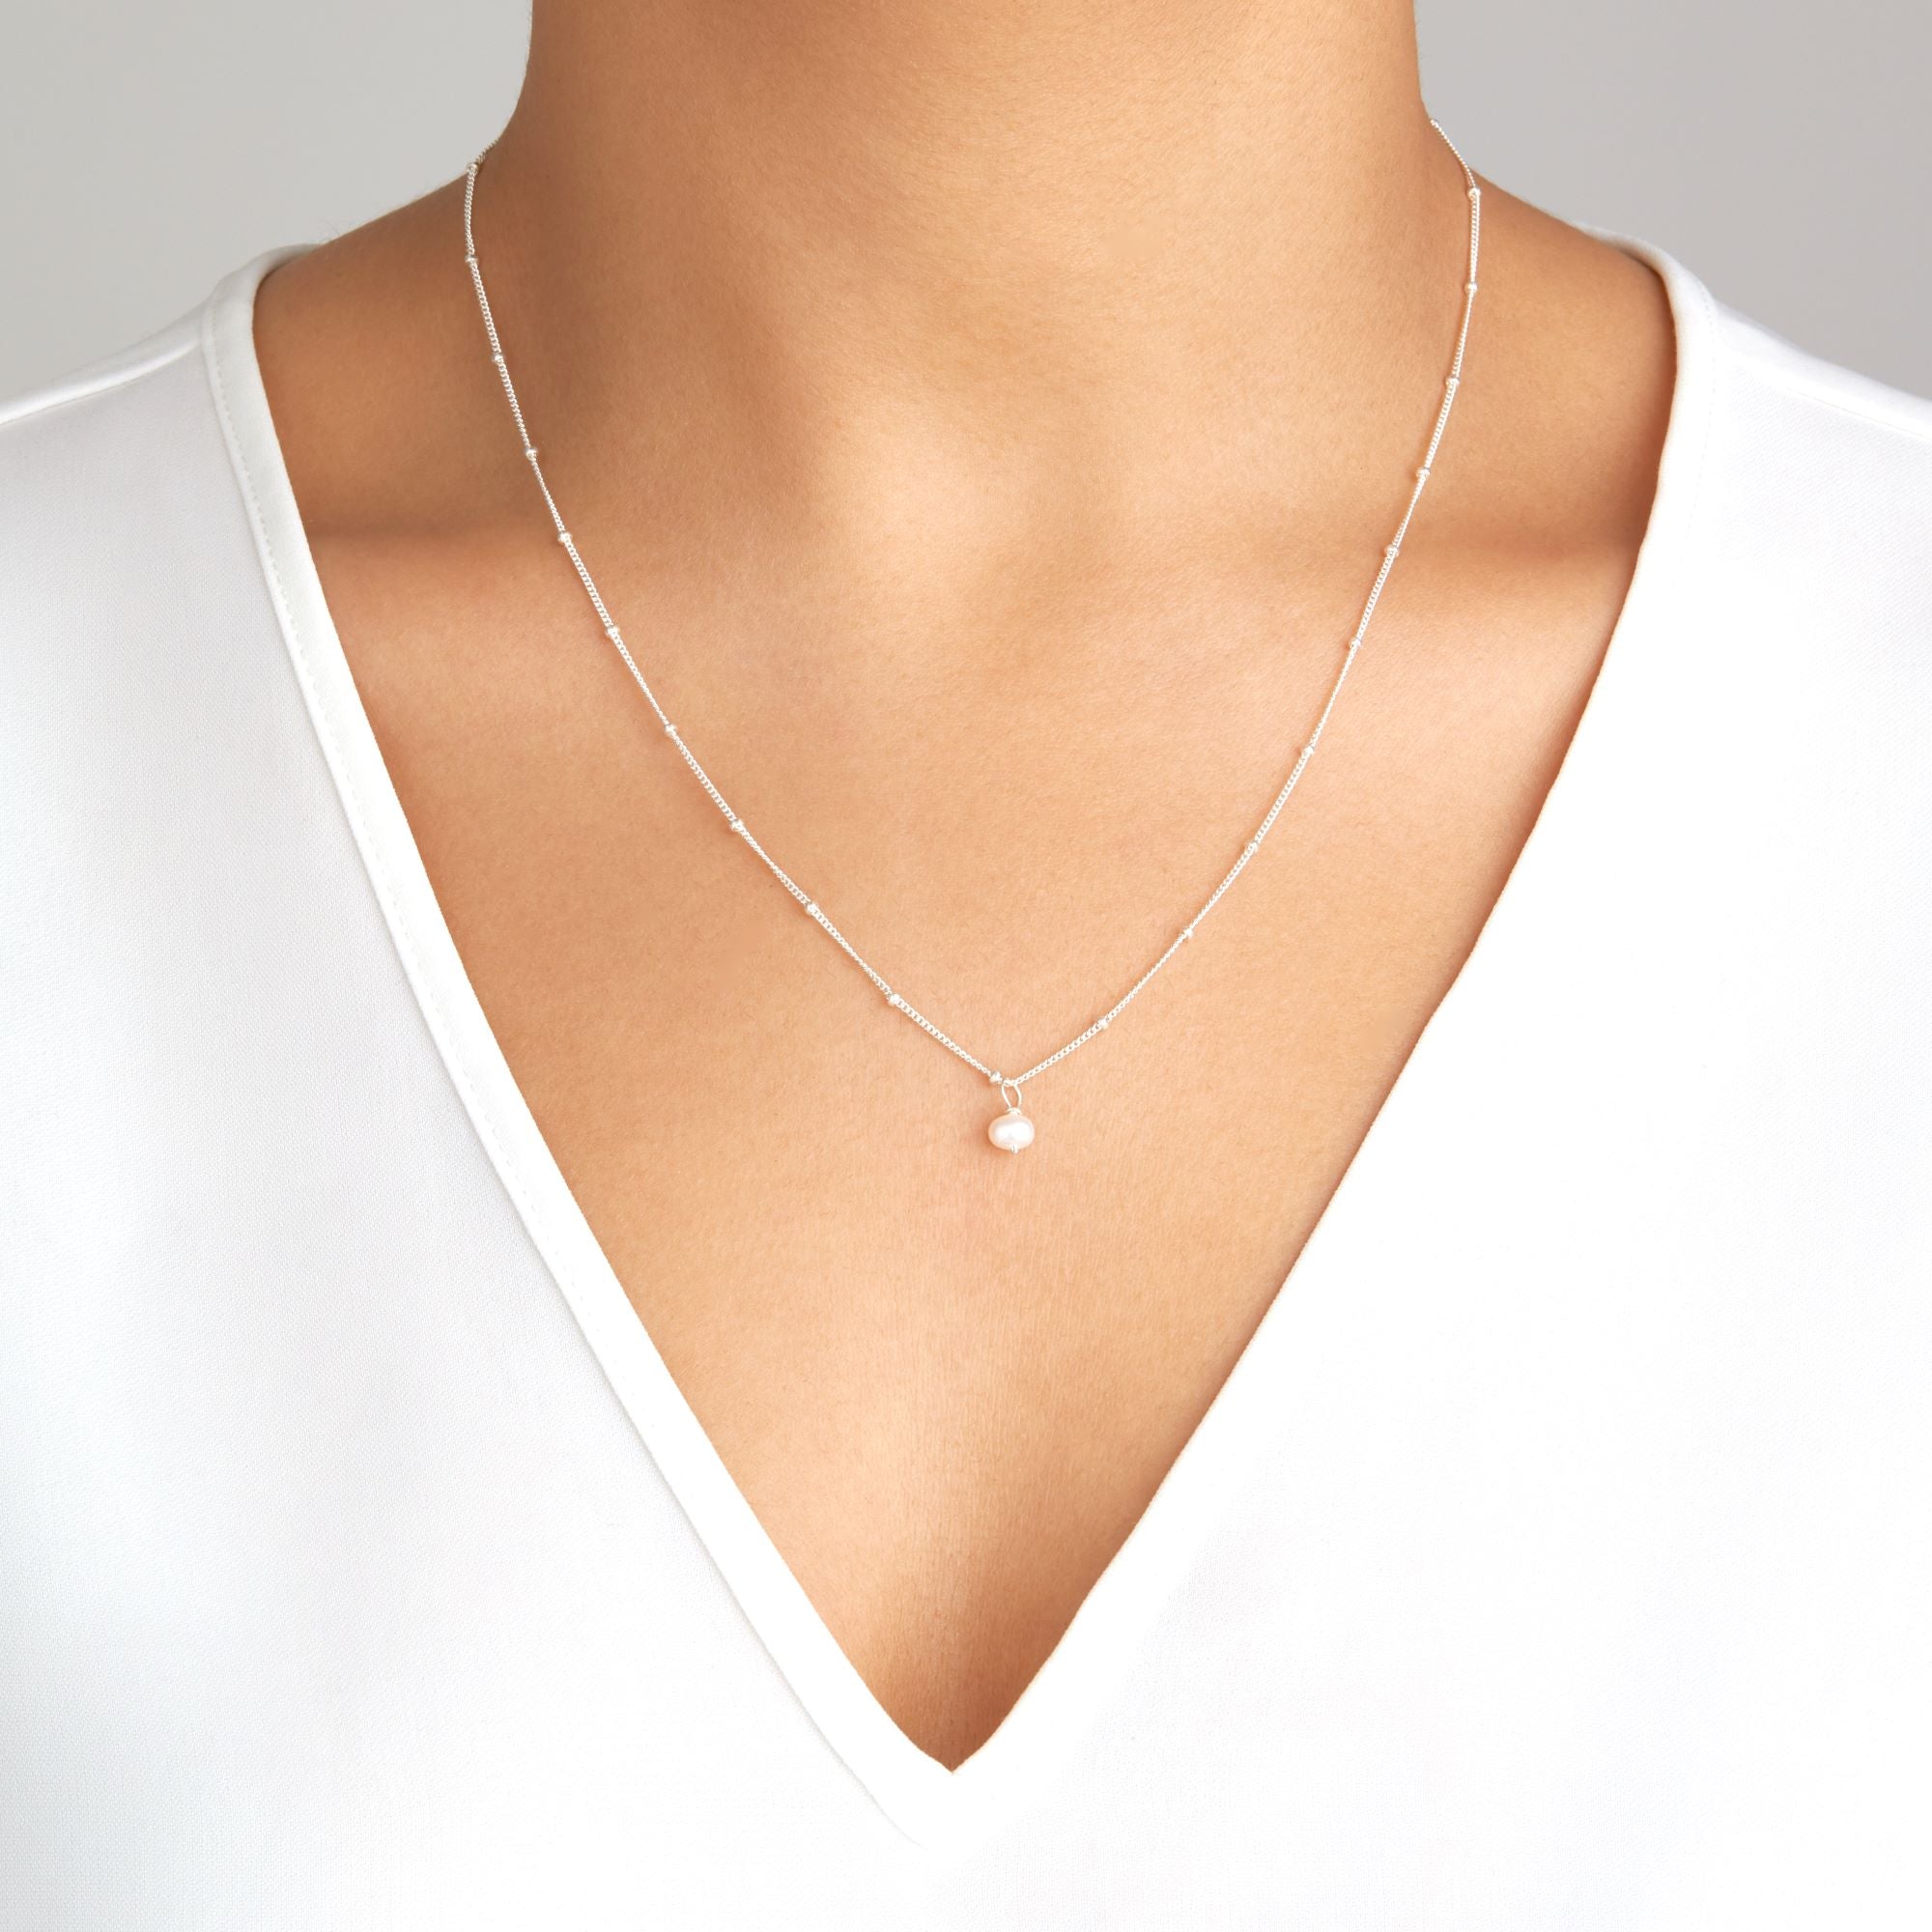 Silver single pearl satellite necklace around a neck of a woman wearing a white V-neck top